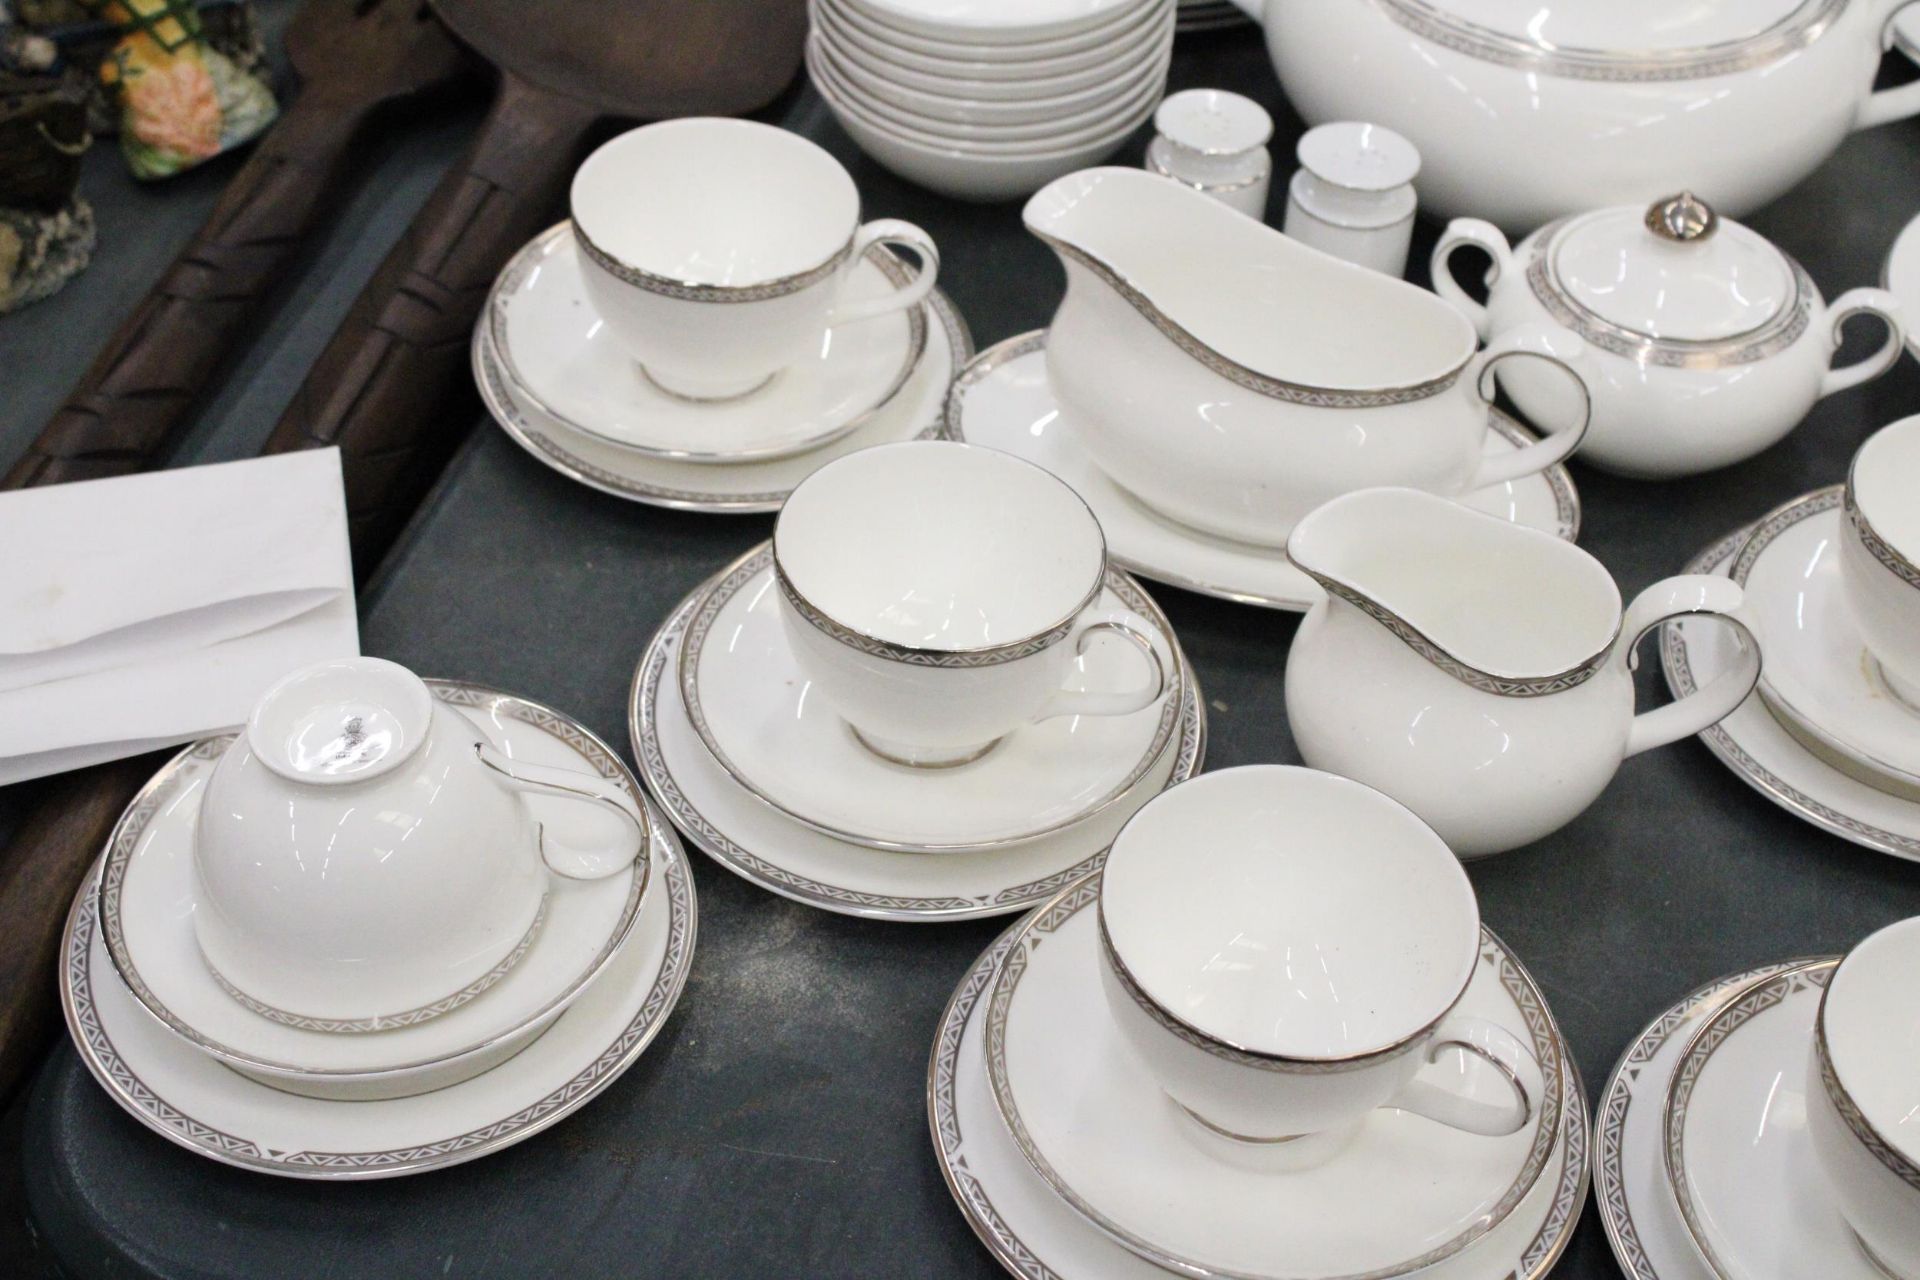 A ROYAL DOULTON 'DRYDEN' DINNER SERVICE TO INCLUDE SERVING BOWLS, VARIOUS SIZES OF PLATES, DESSERT - Image 5 of 6